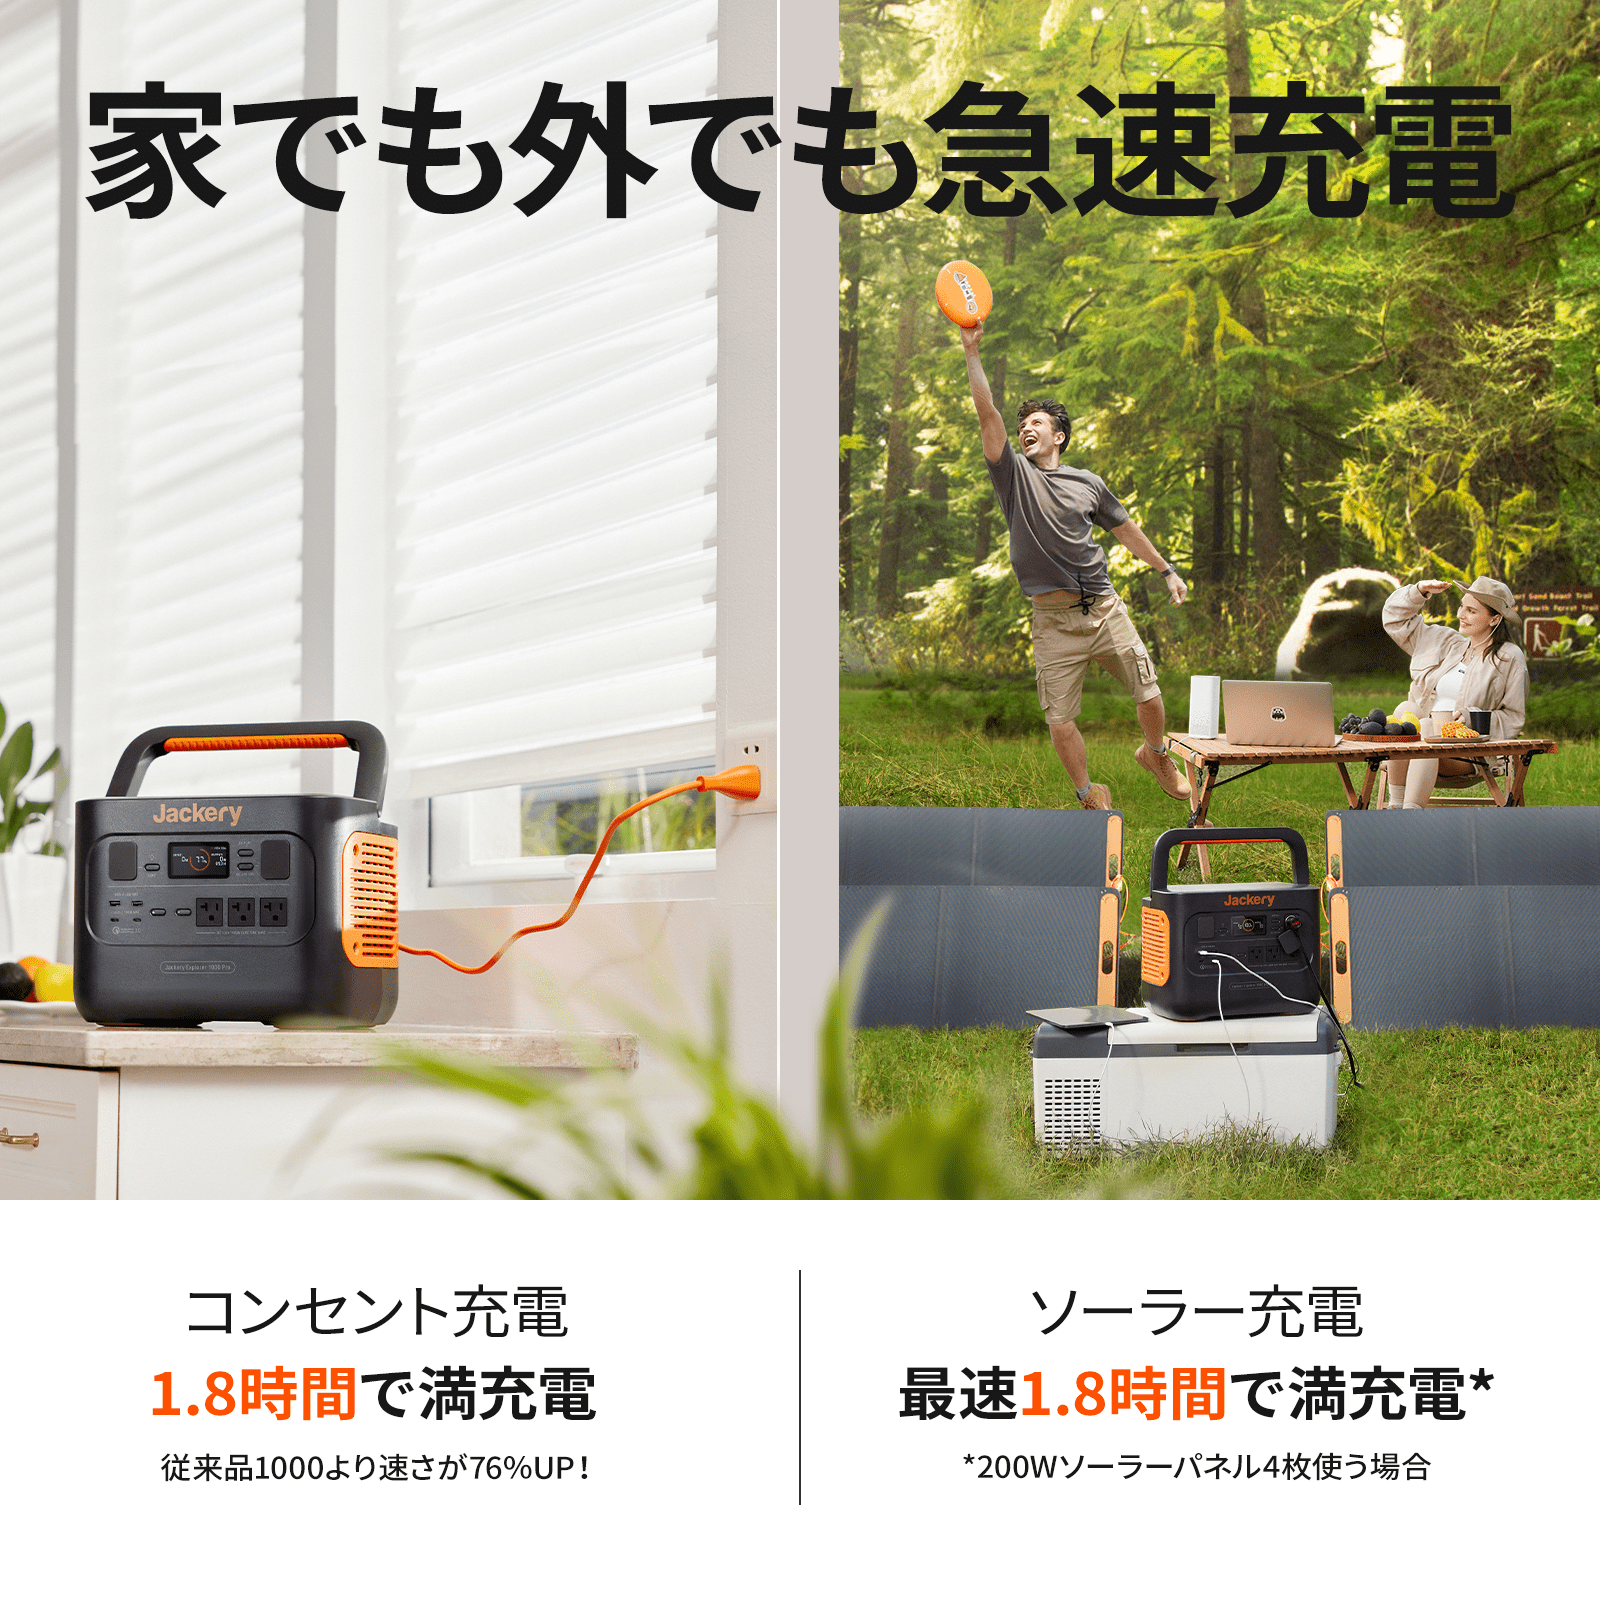 Jackery ポータブル電源 1000 Pro｜コンパクト・高速充電・大容量